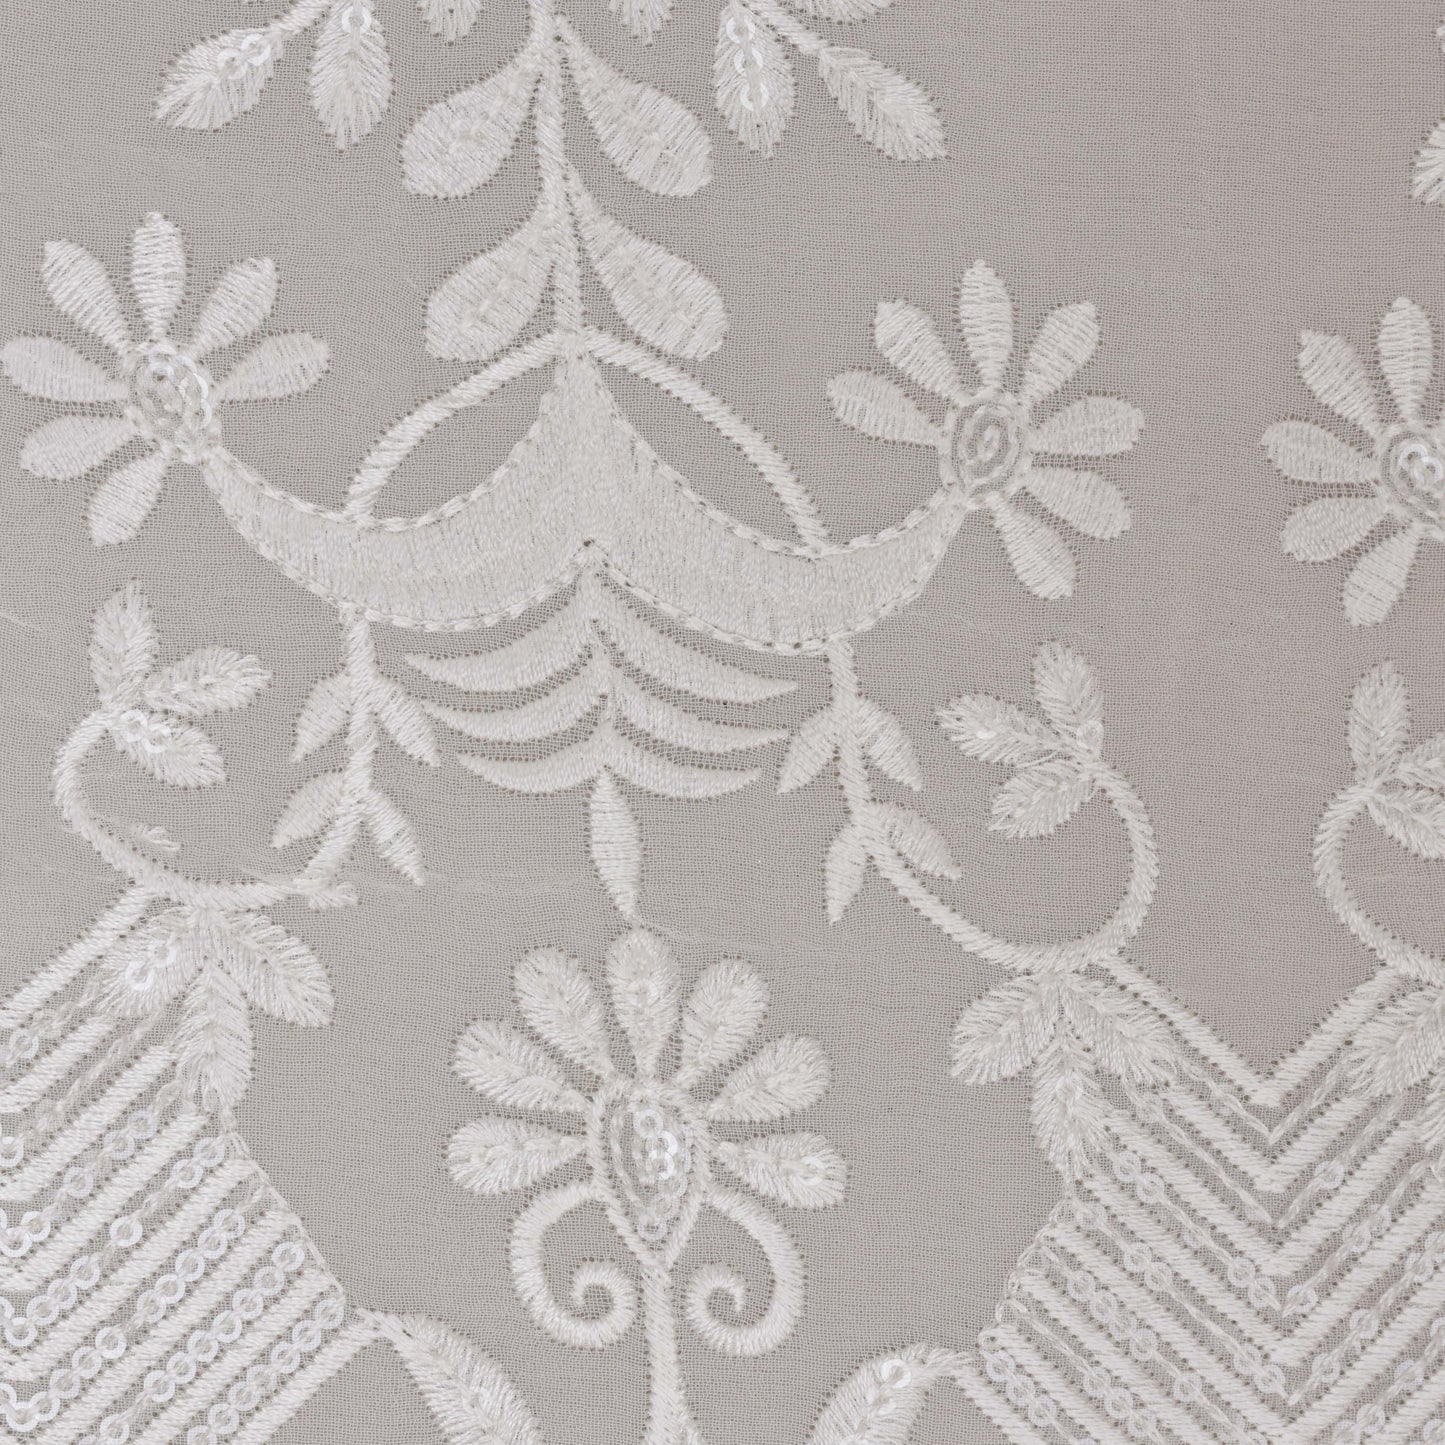 White Color Georgette Embroidery Fabric